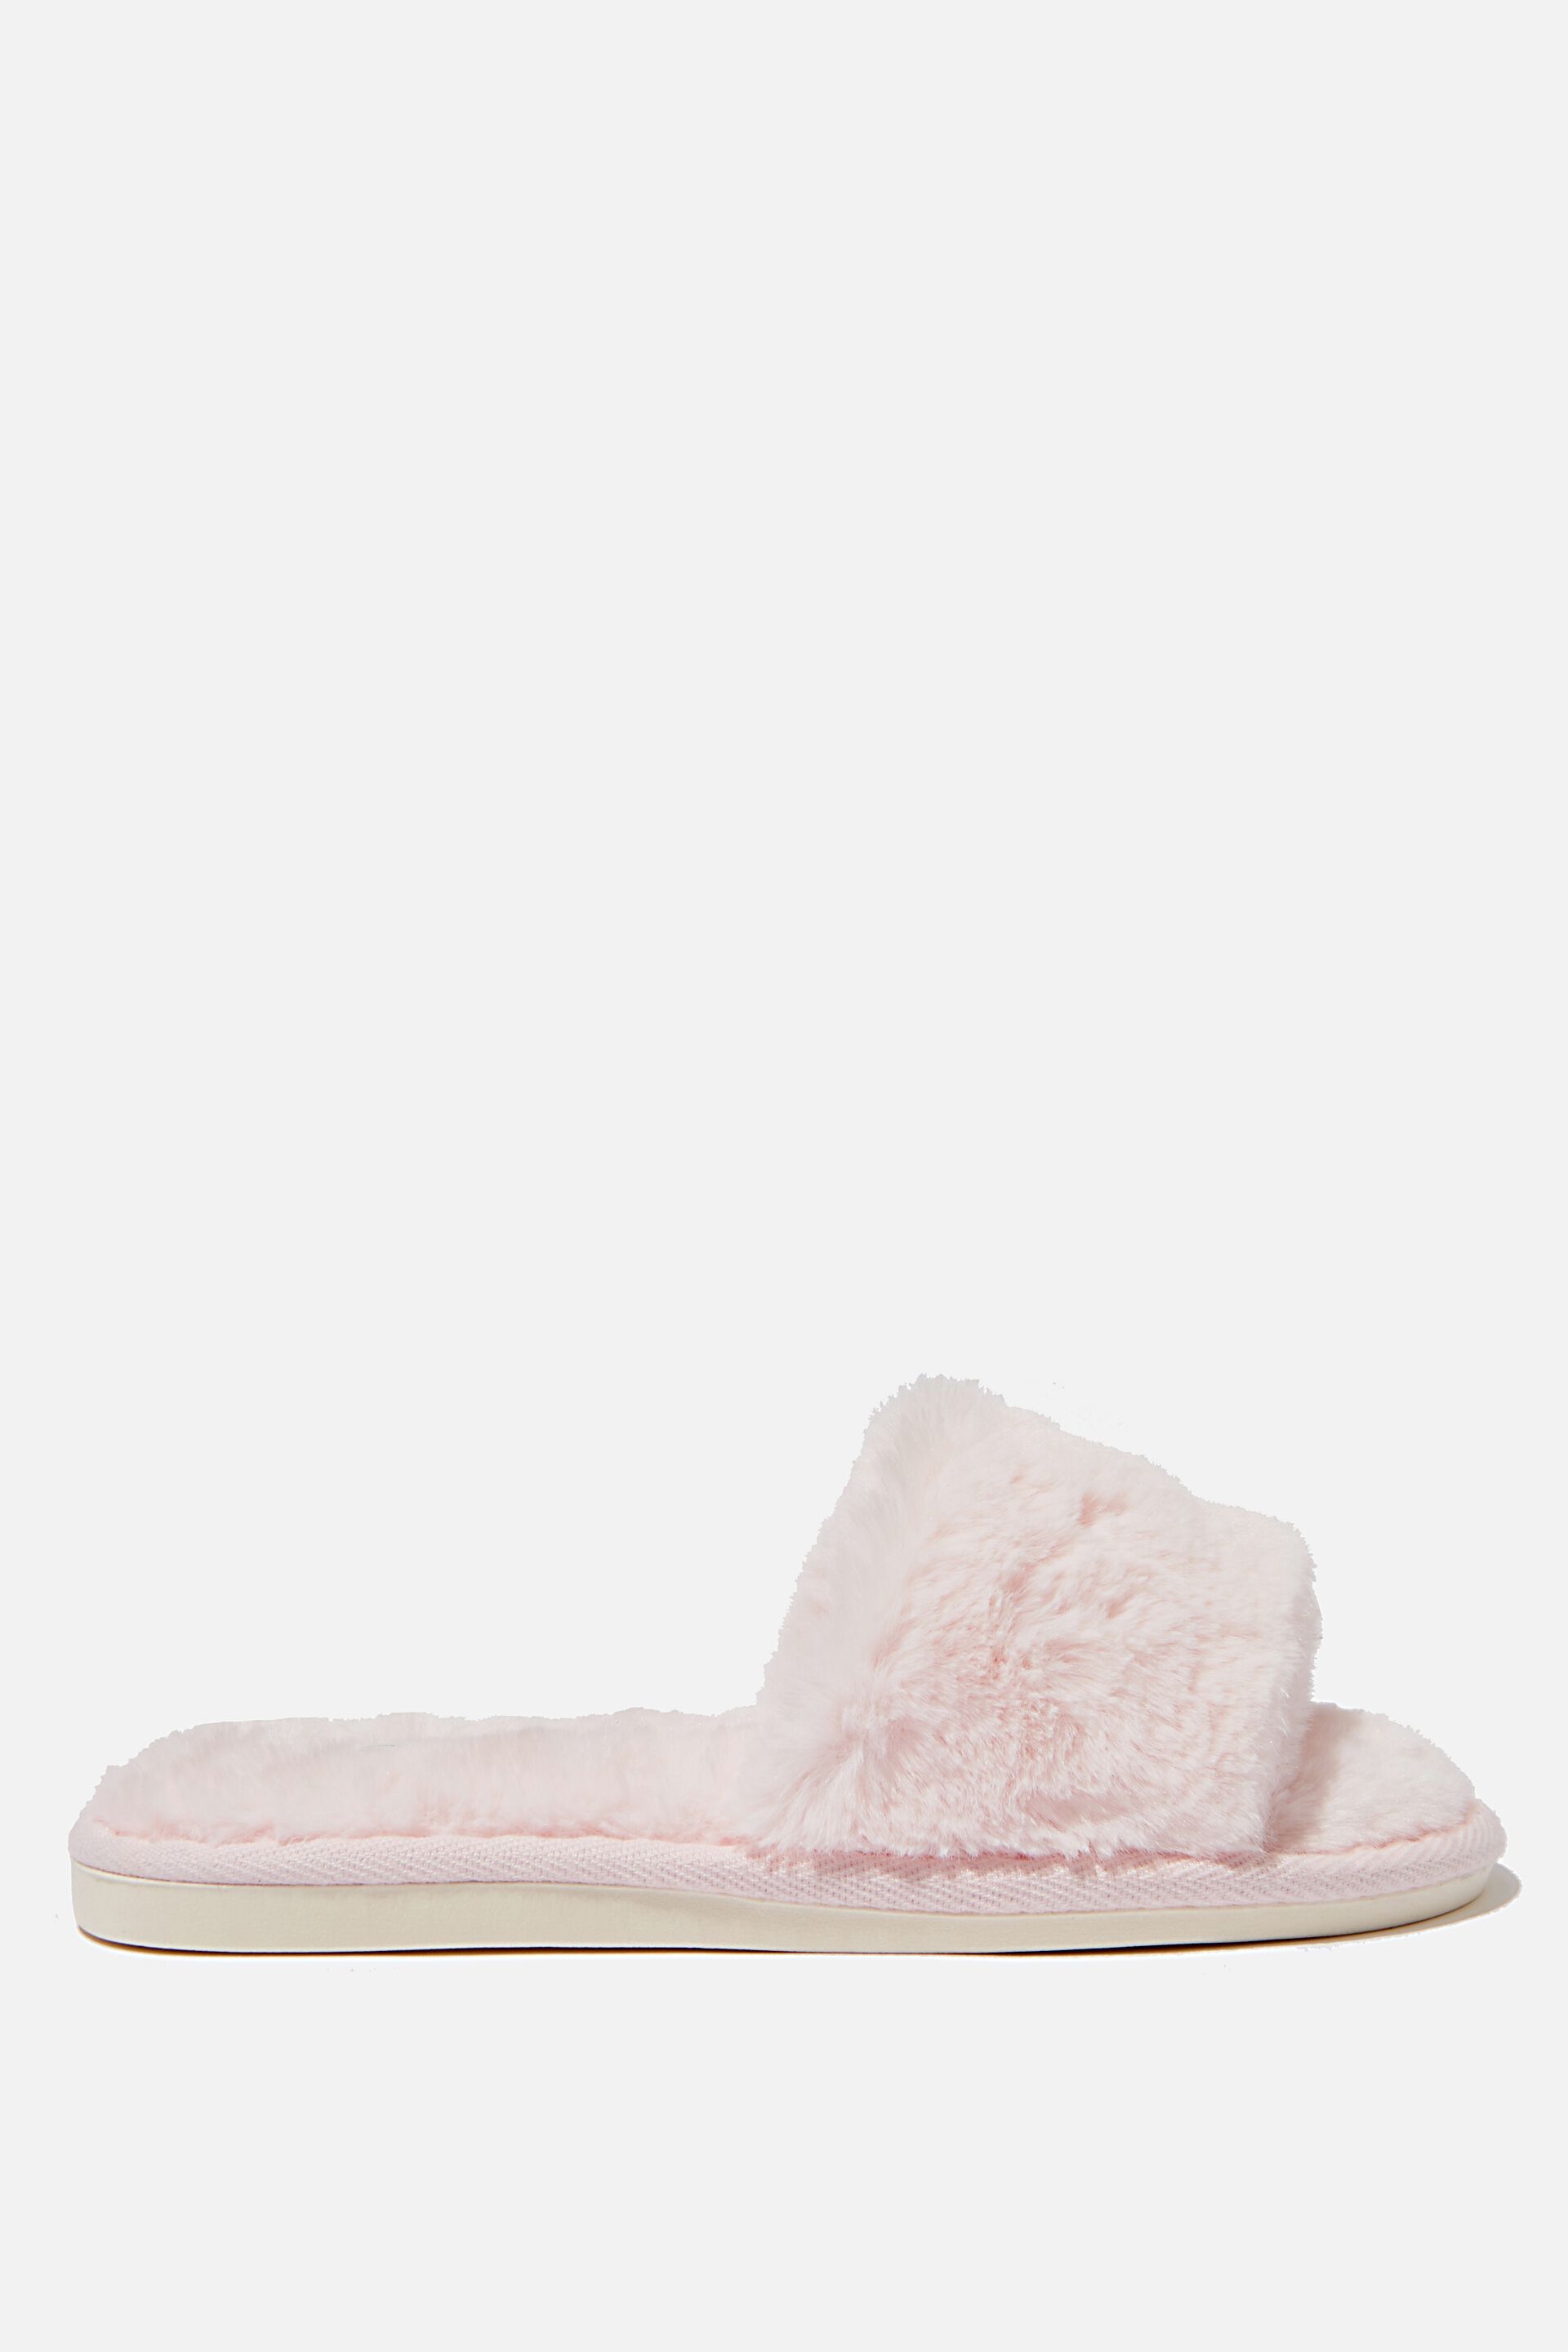 cotton on kids slippers